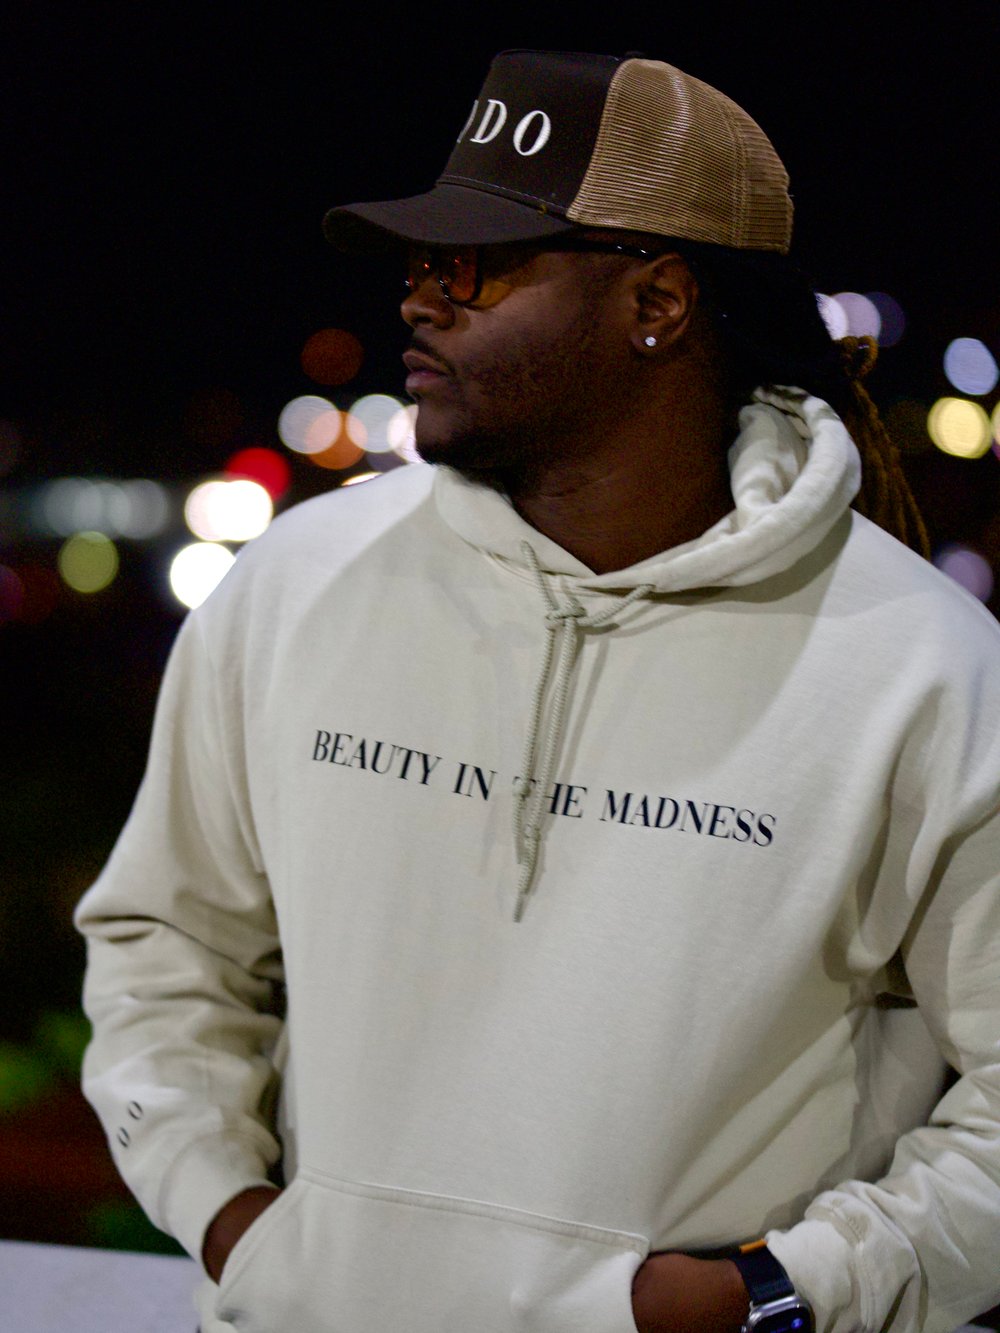 'BEAUTY IN THE MADNESS' HOODIE